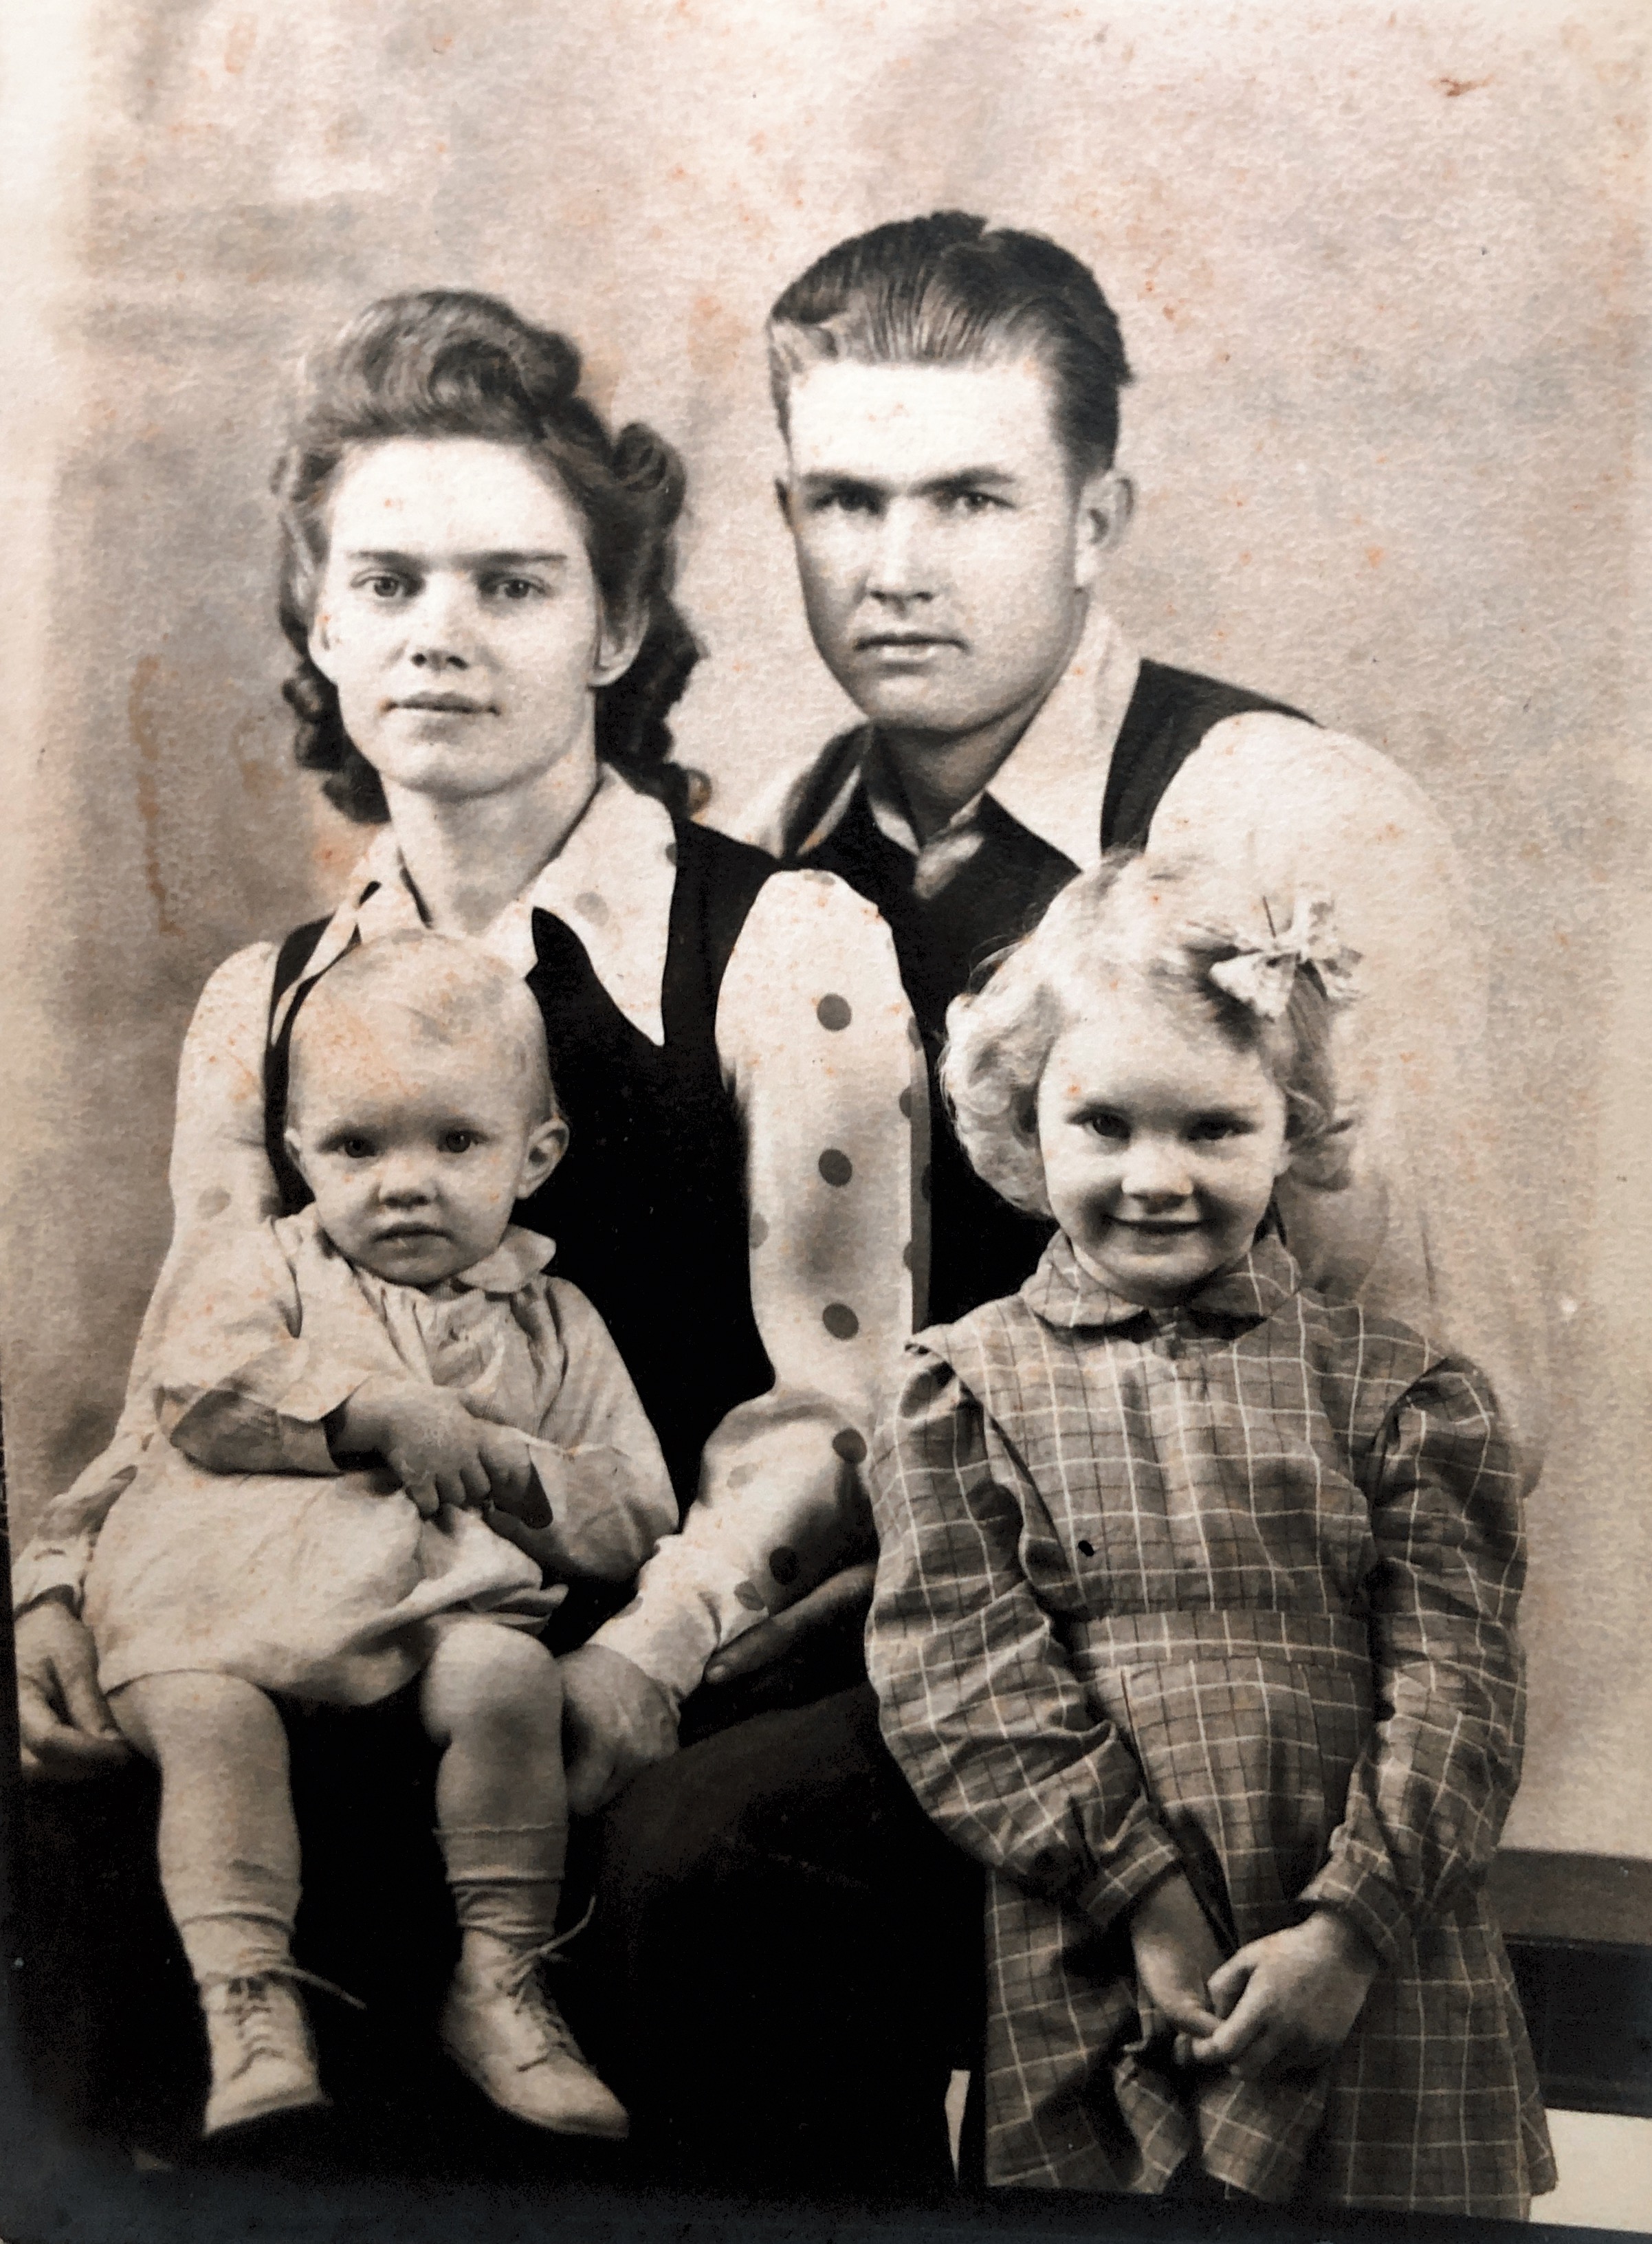 Taken in the early 1940s. My grandparents, mom and aunt. 